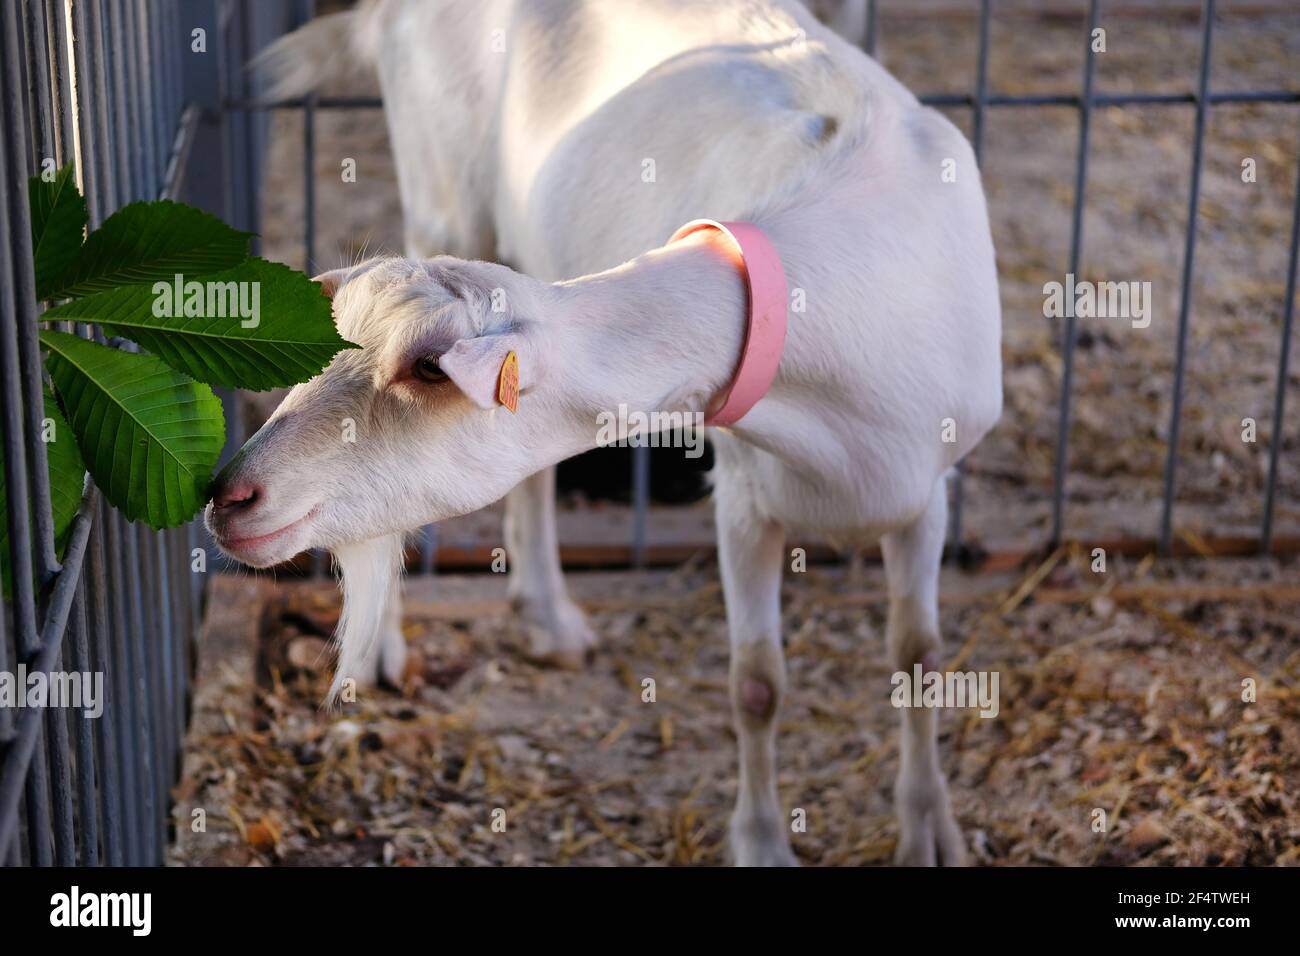 Young white goat in pink collar eats green leaf in stall on farm. Feeding on animal farm. Stock Photo